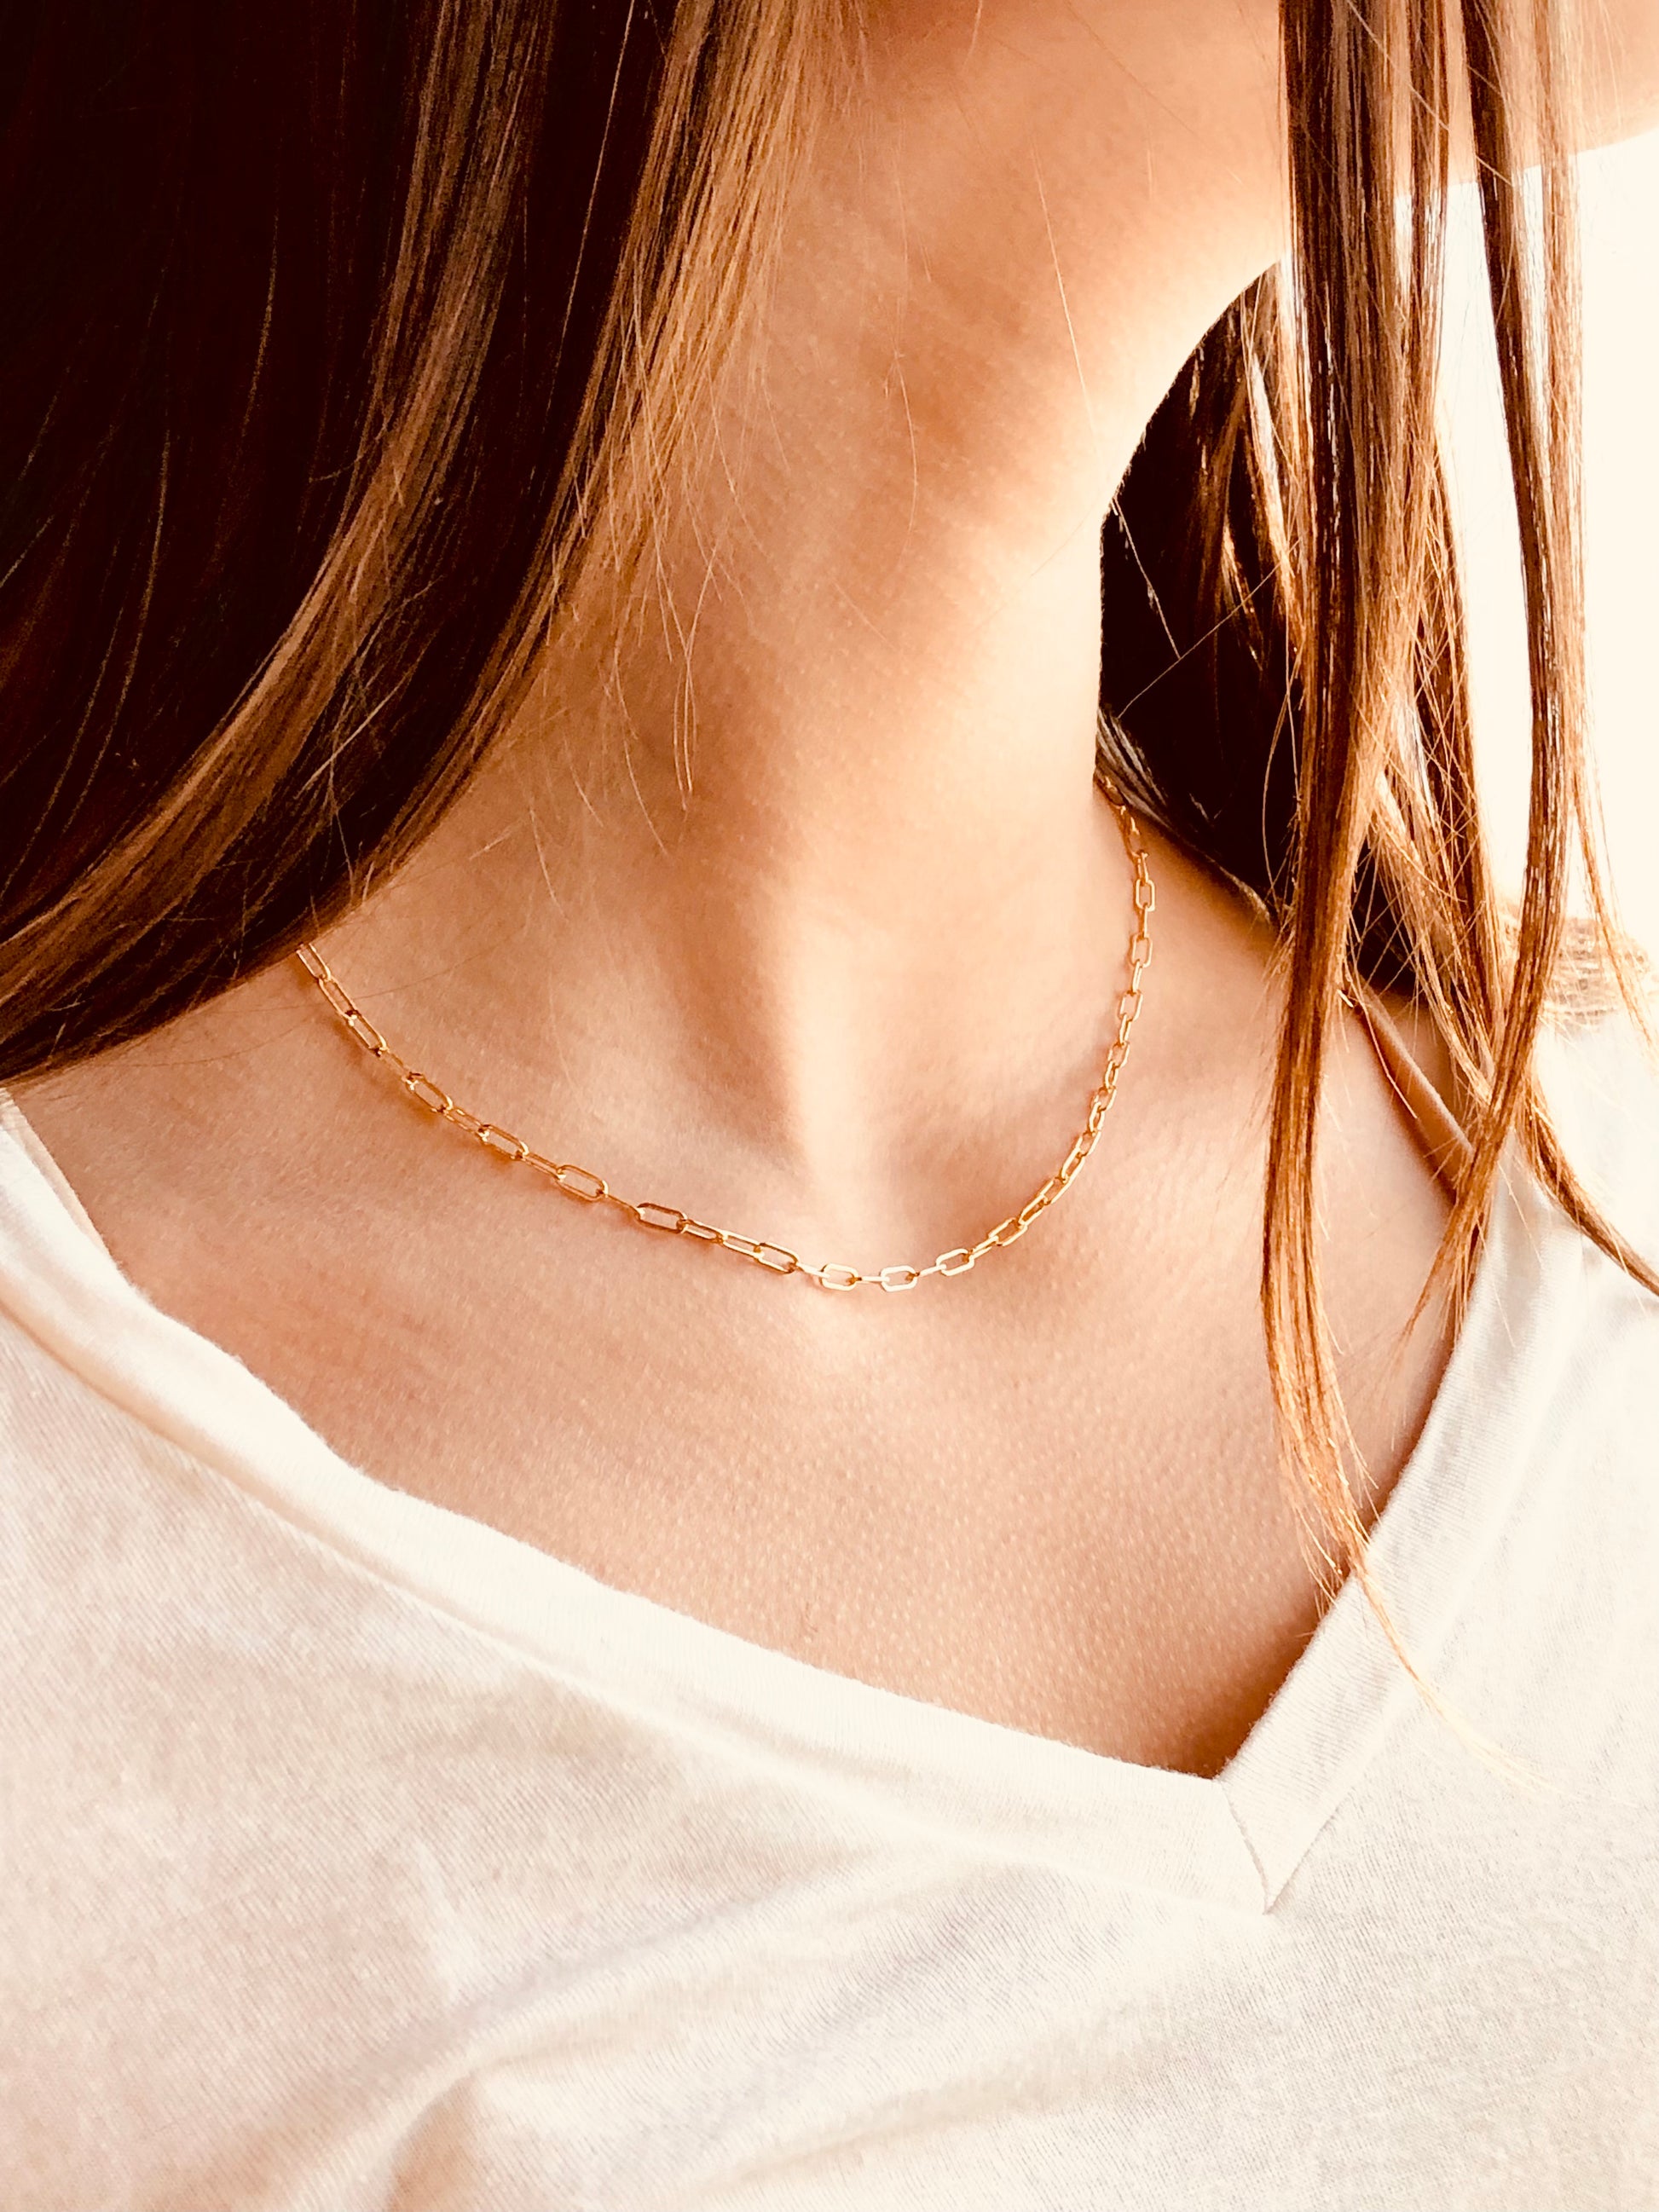 Paperclip Necklace, Link Choker Necklace, Link Necklace, Gold Link Choker, Choker Necklace, Link Chain Necklace, Everyday Jewelry